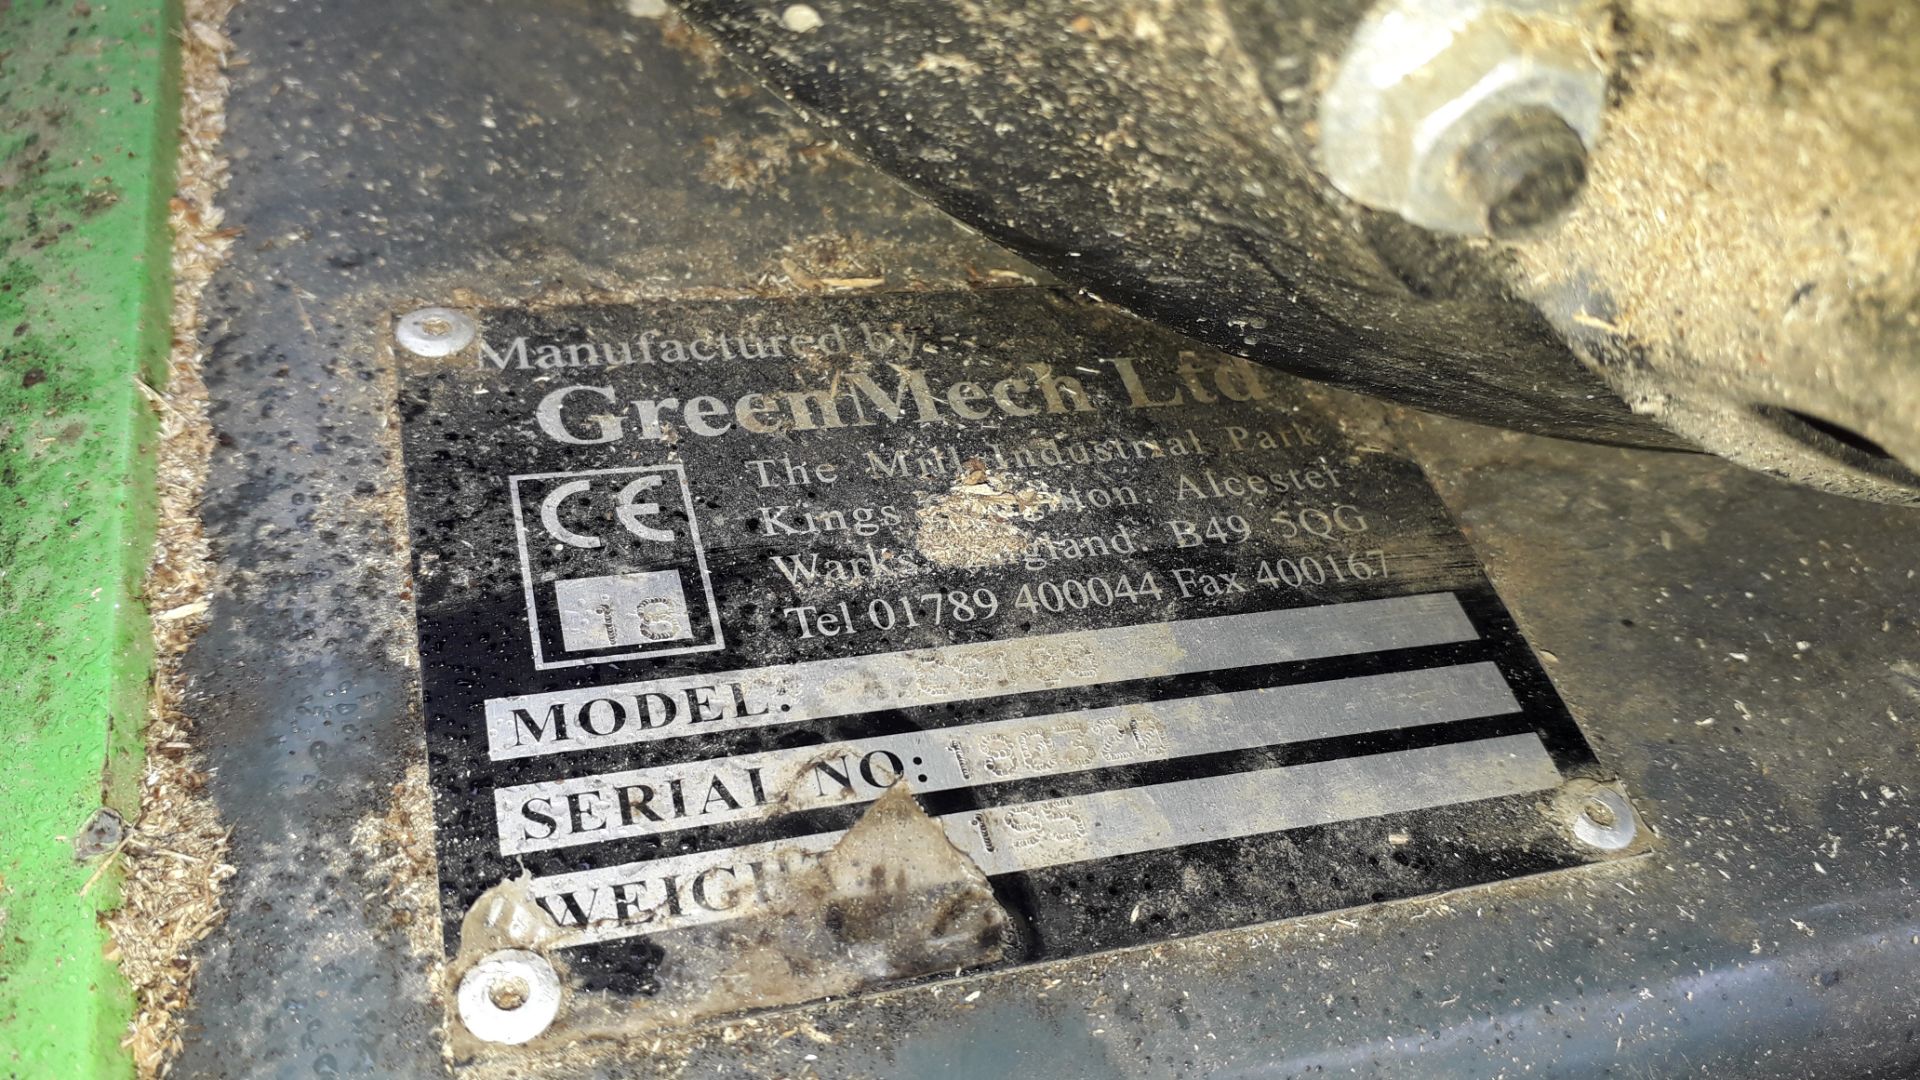 Greenmech CS100 Tow Along Wood Chipper, Serial Number 180320 (2018) with Spare Blades - Image 3 of 3